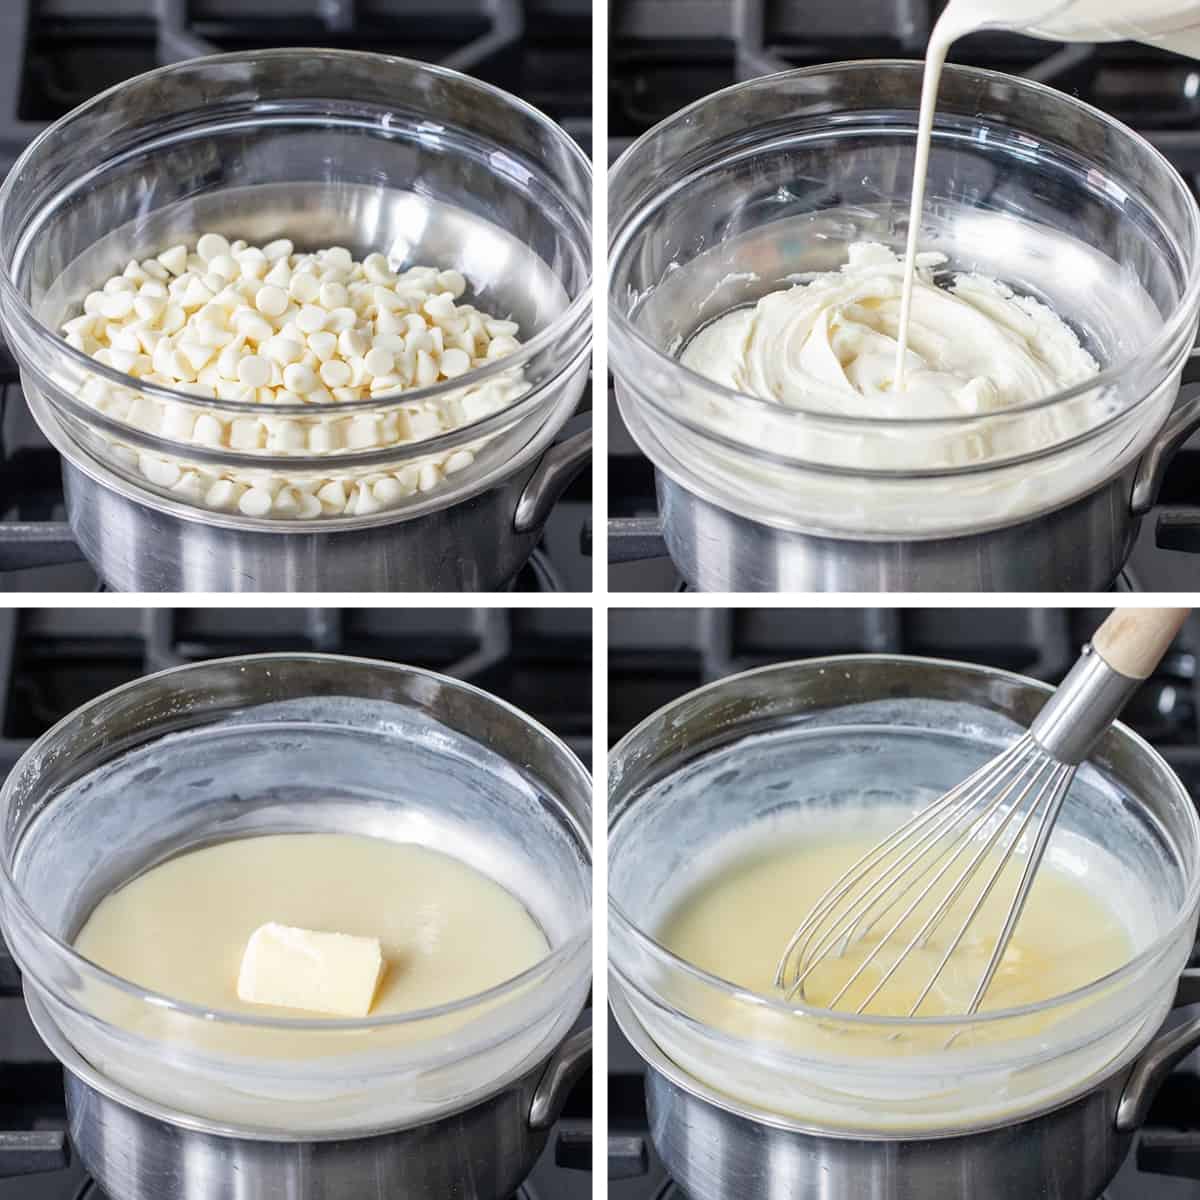 Making the process of White Chocolate